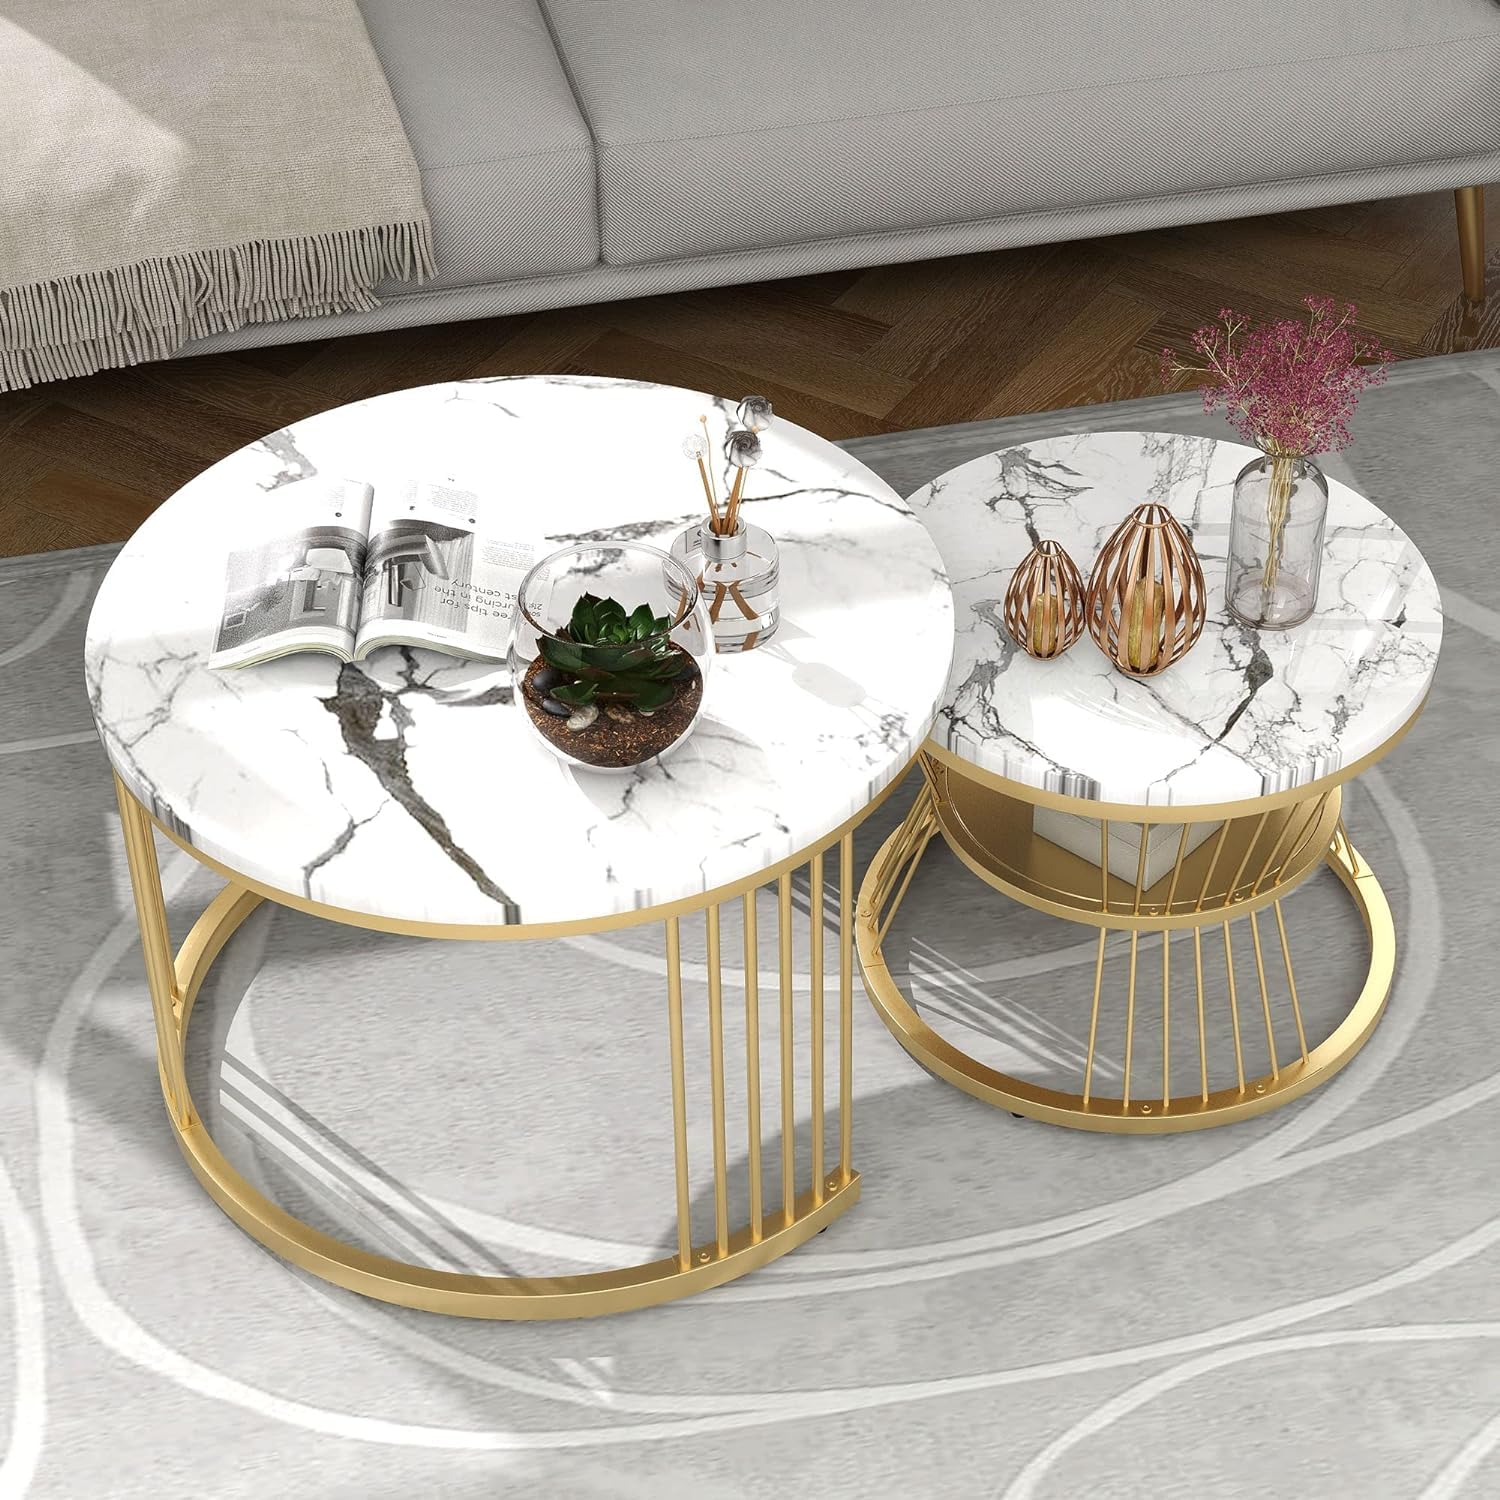 Iron Frame Faux Marbled Laminated Round Coffee Table Set of 2 Stacking Center Tables for Living Room Bedroom or Apartments (Golden White)